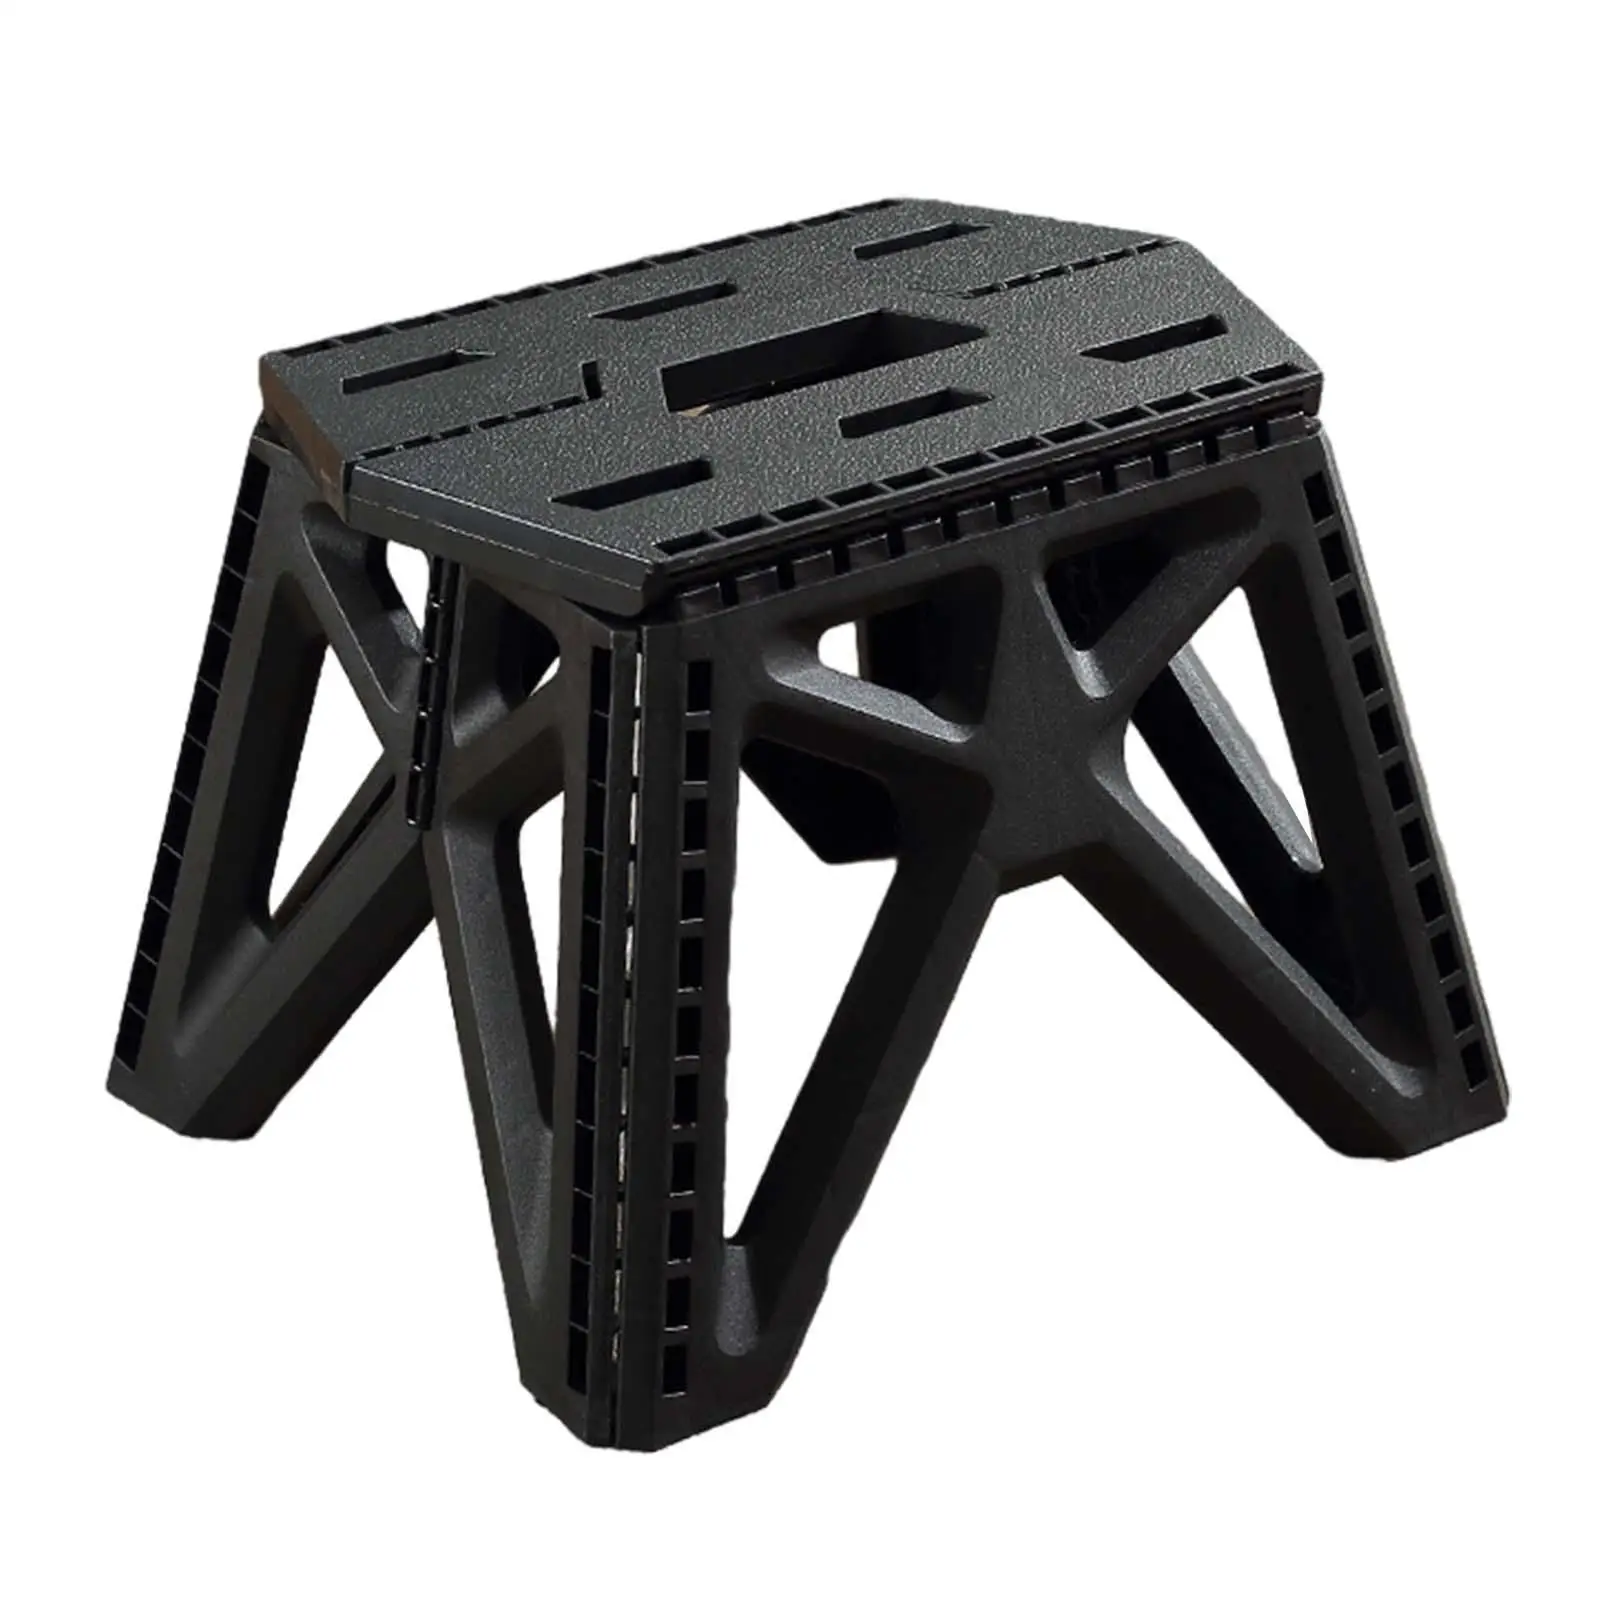 Foldable Camping Stool Portable Collapsible Lightweight Outside Camp Stool Chair for Hiking Backpacking Patio Travel Picnic